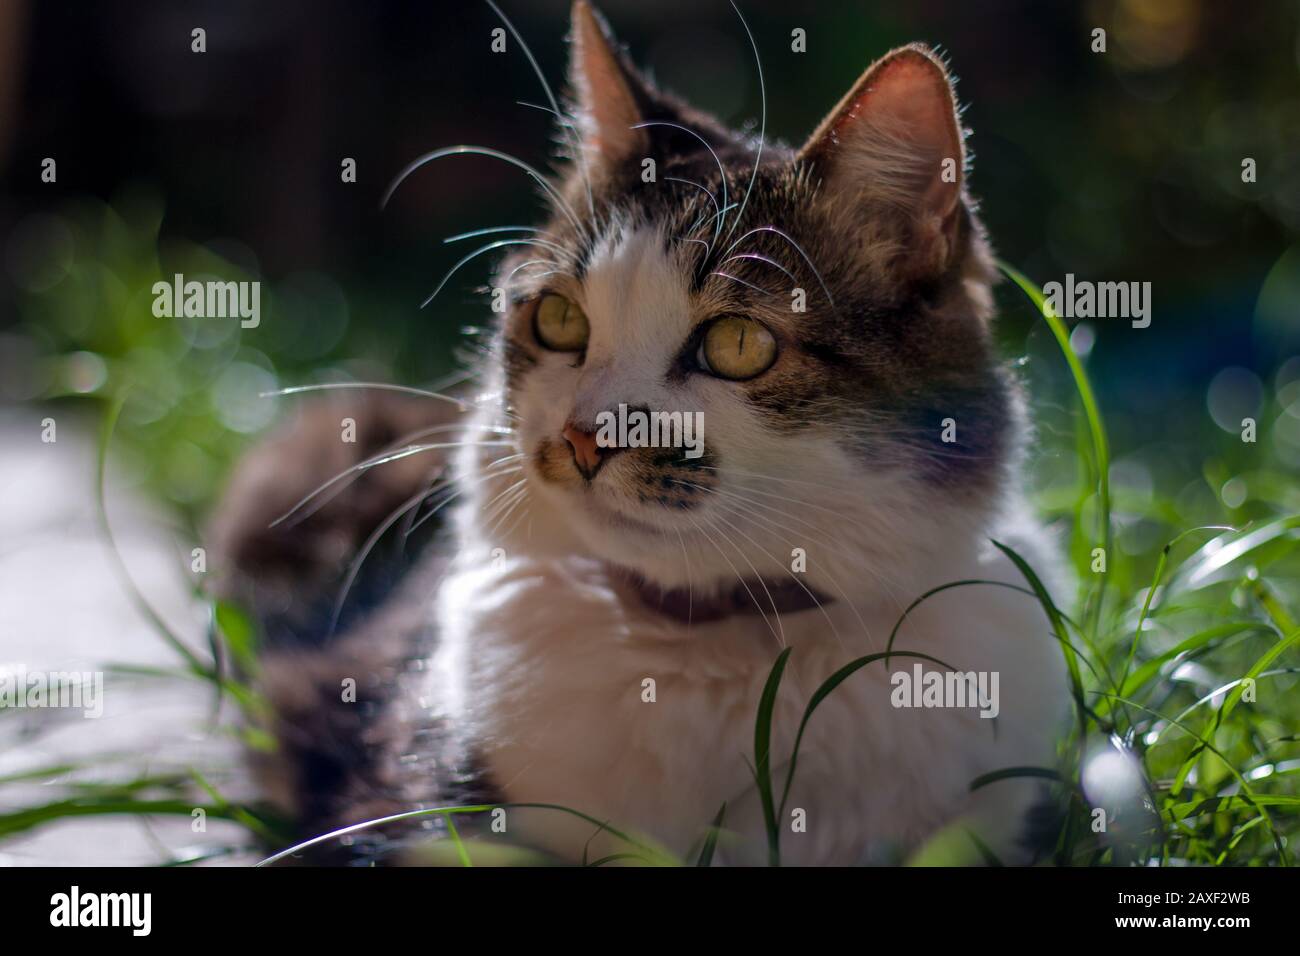 Close-up of a playful cat on the grass outdoors Stock Photo